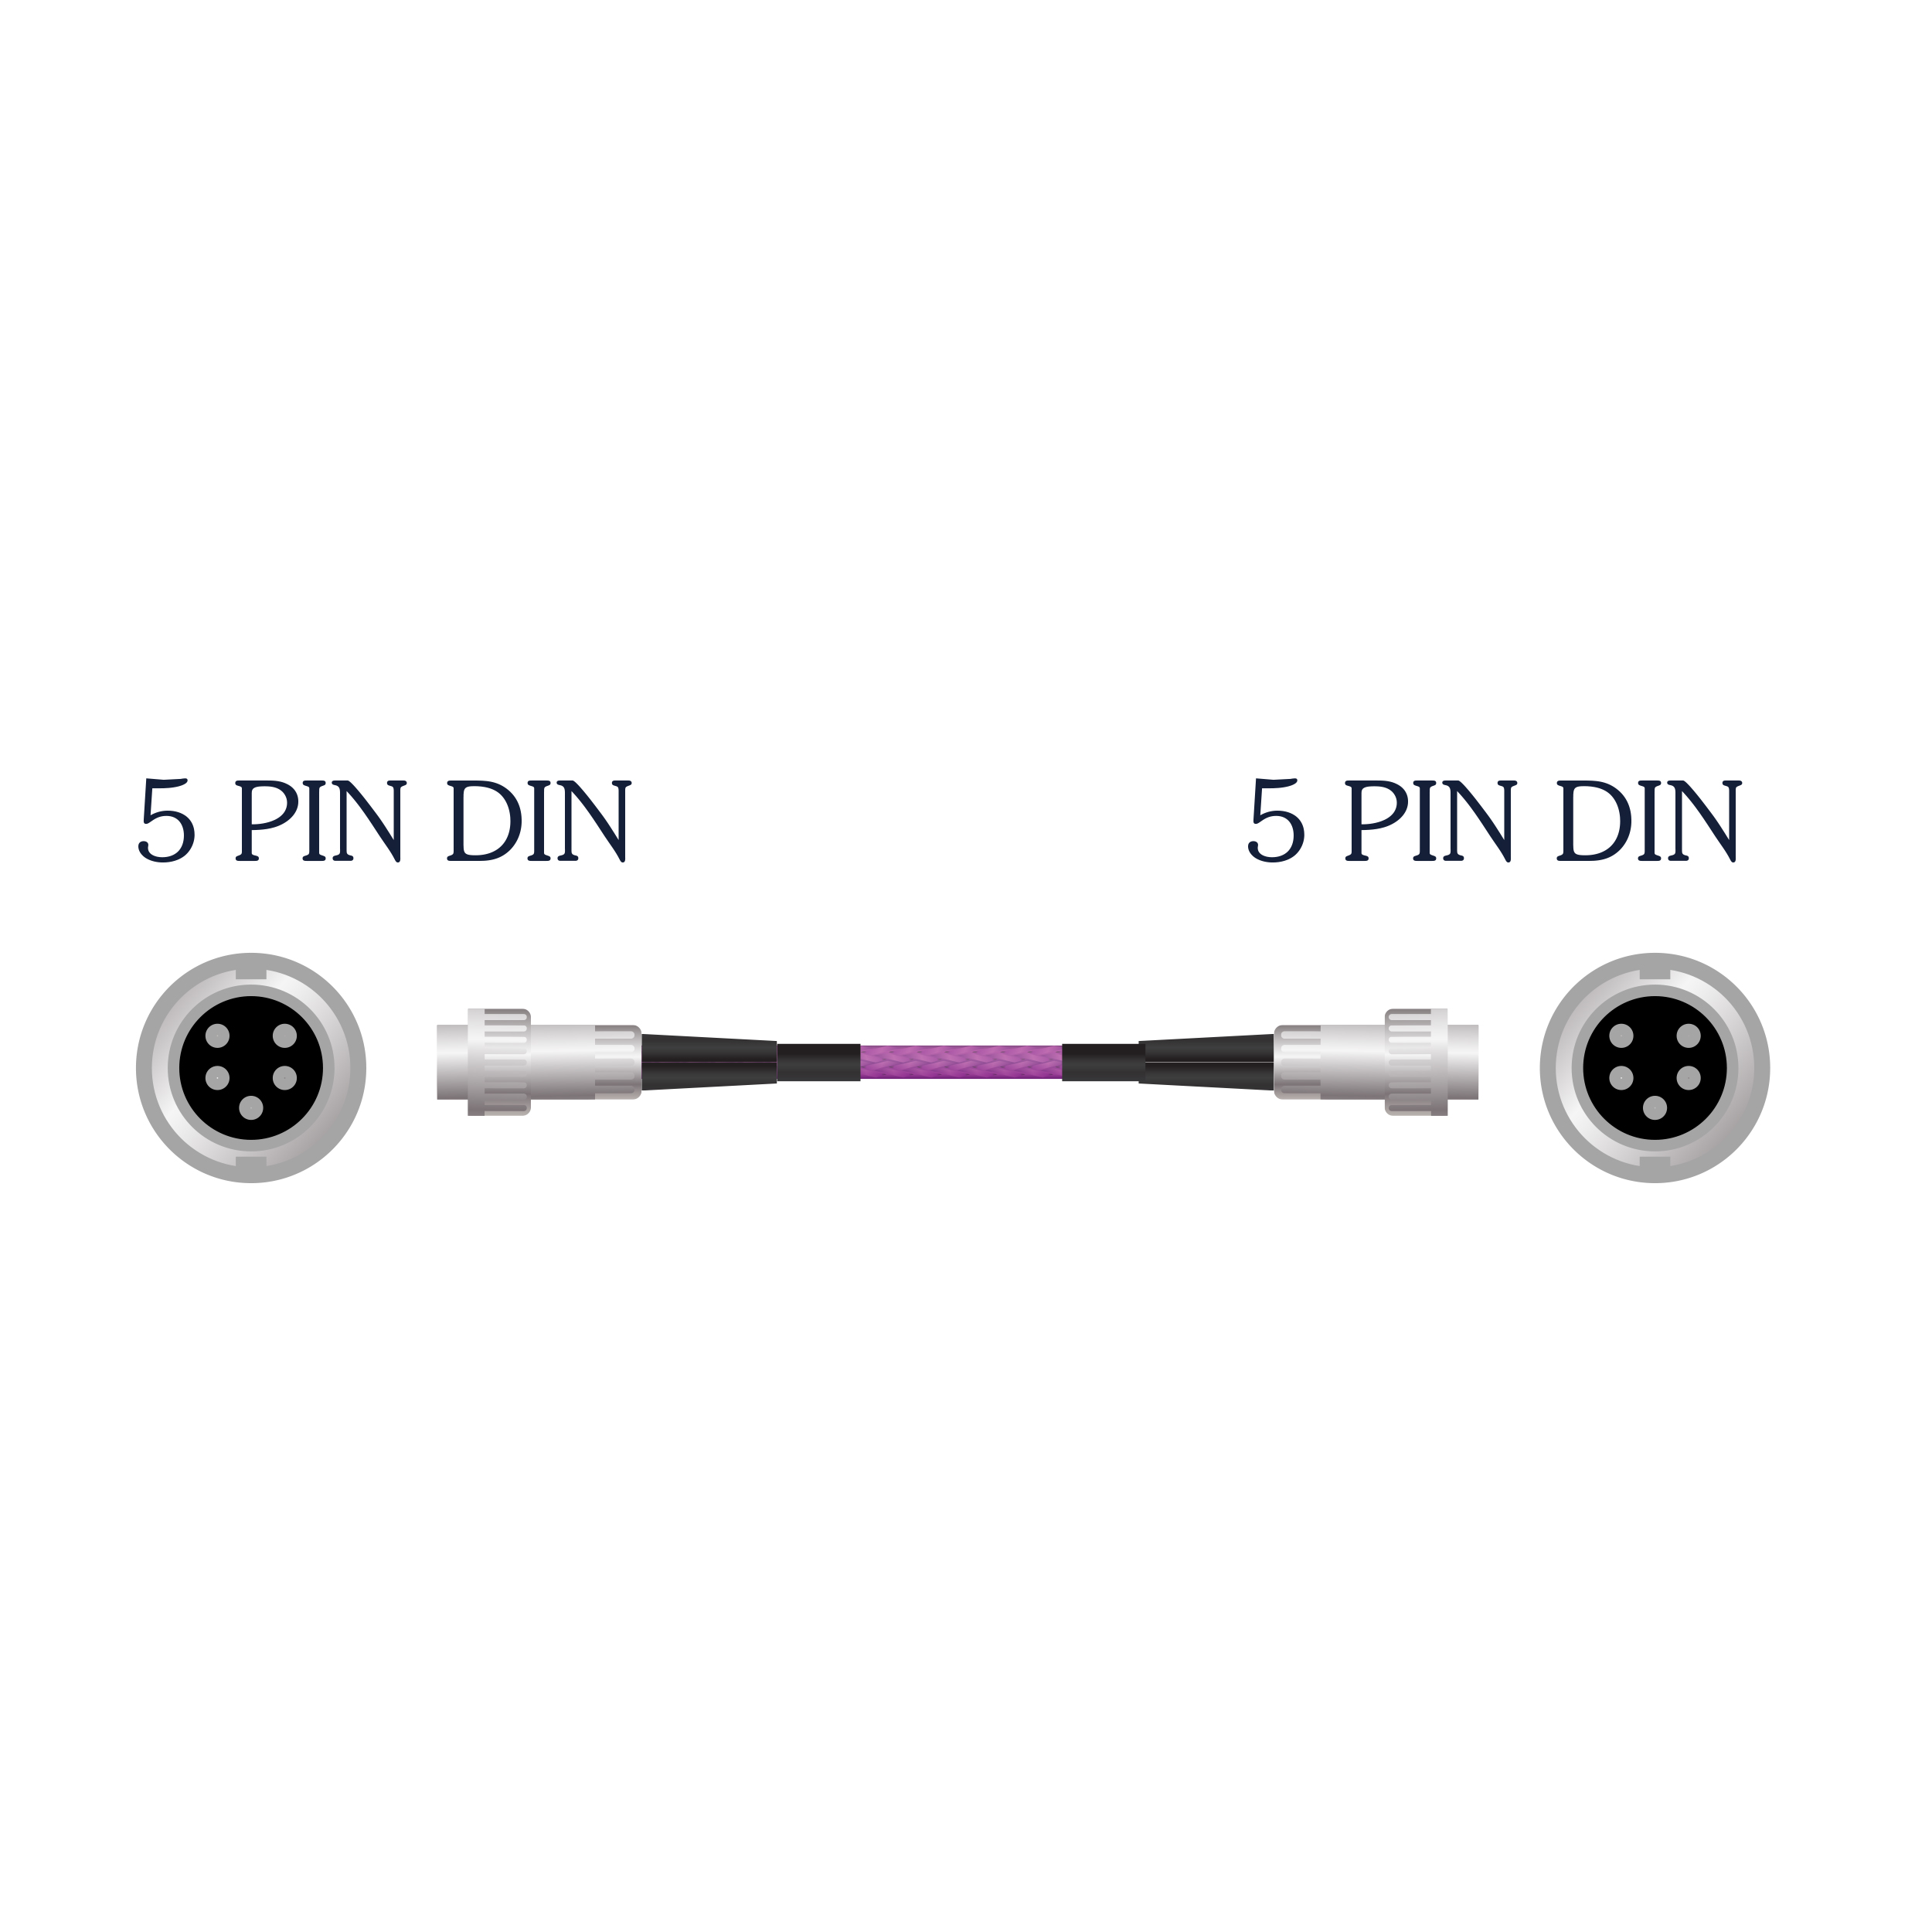 <p align="center">Frey 2 Specialty 5 Pin DIN To 5 Pin DIN (240) Cable</p>